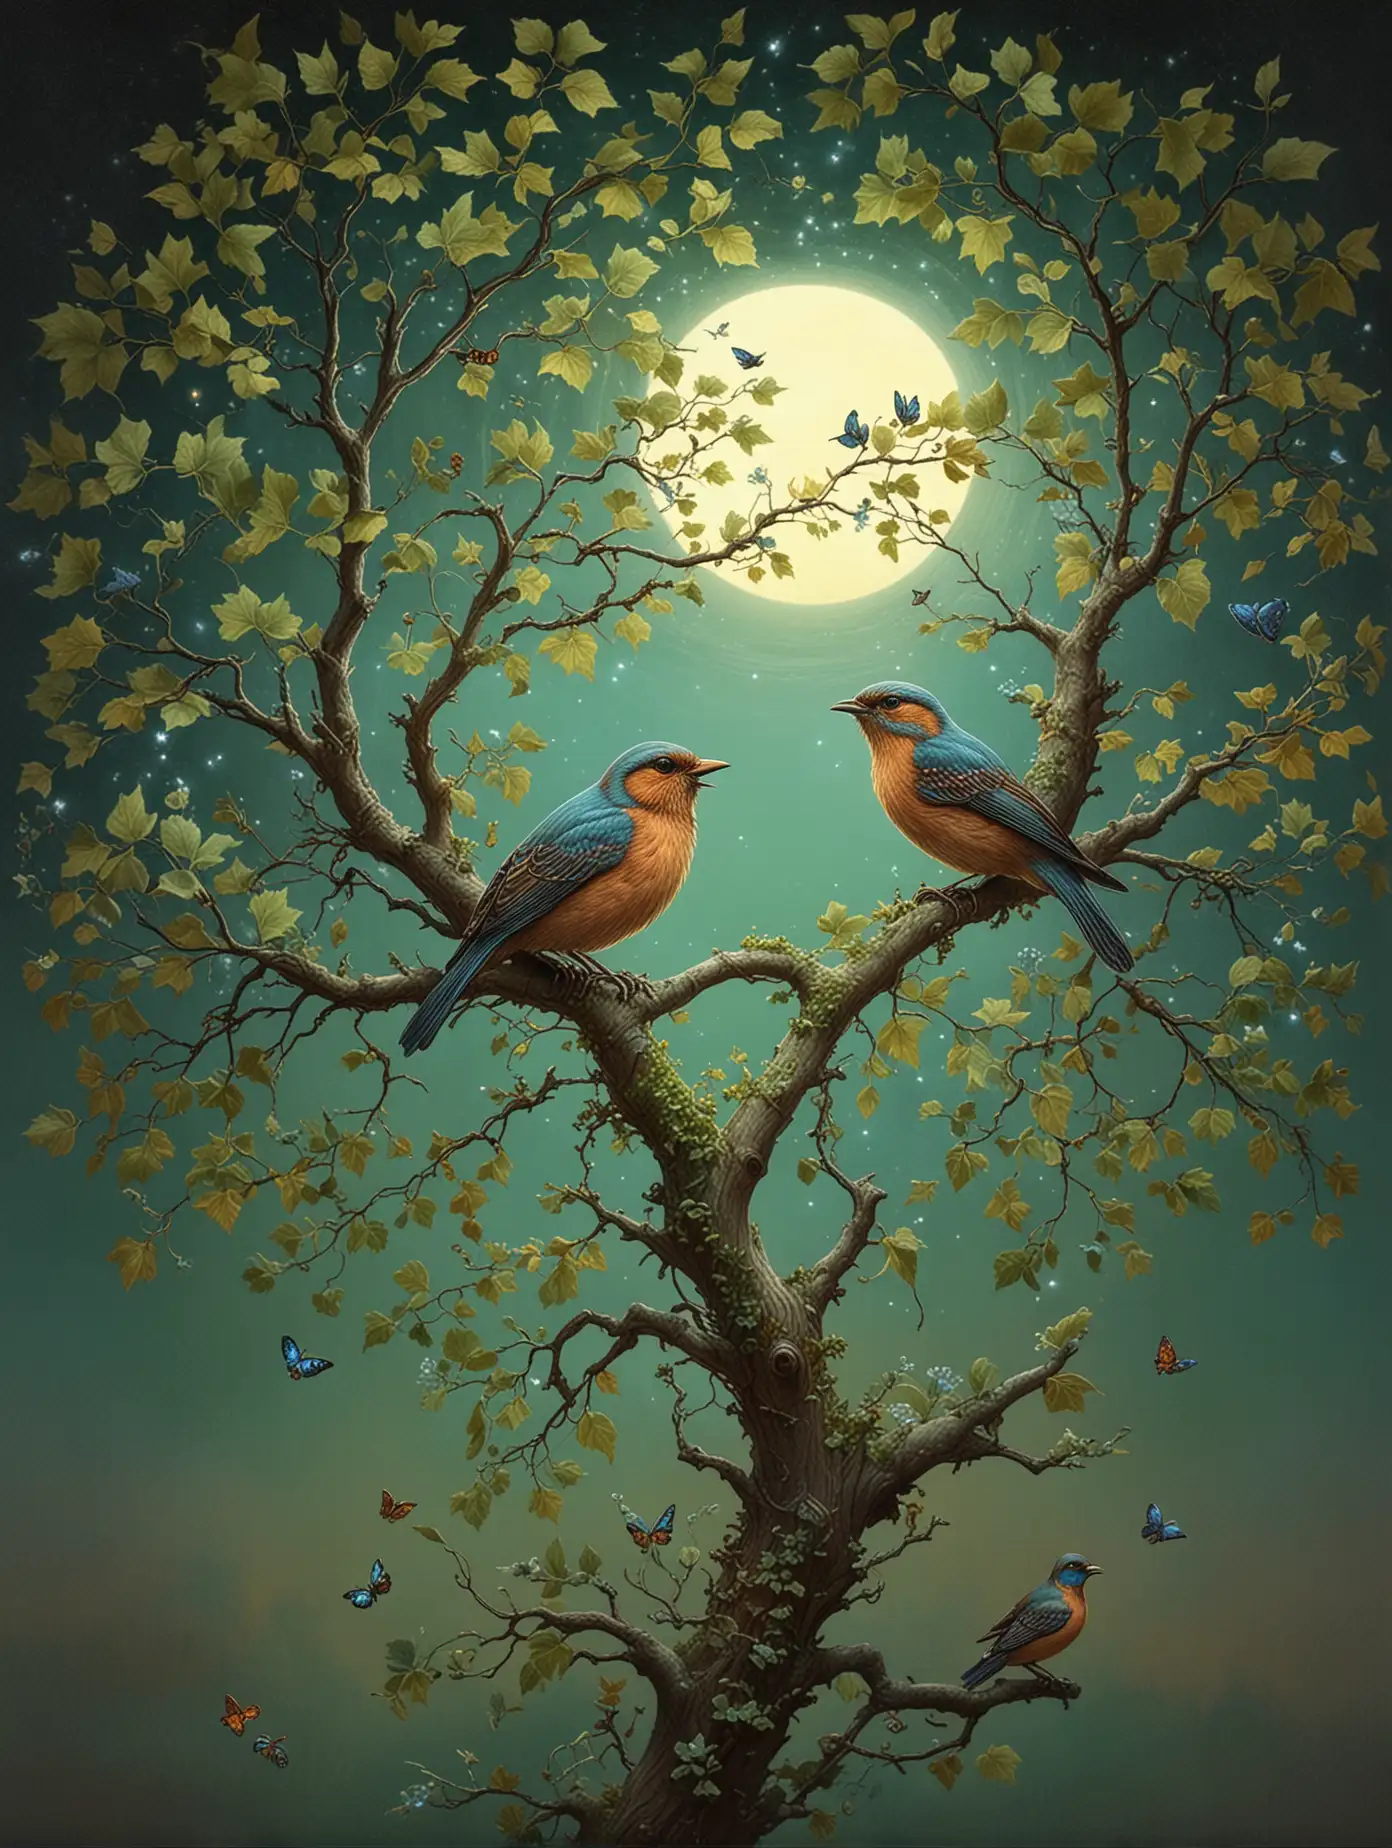 Vintage Night Scene with Singing Birds on a Sycamore Tree Branch